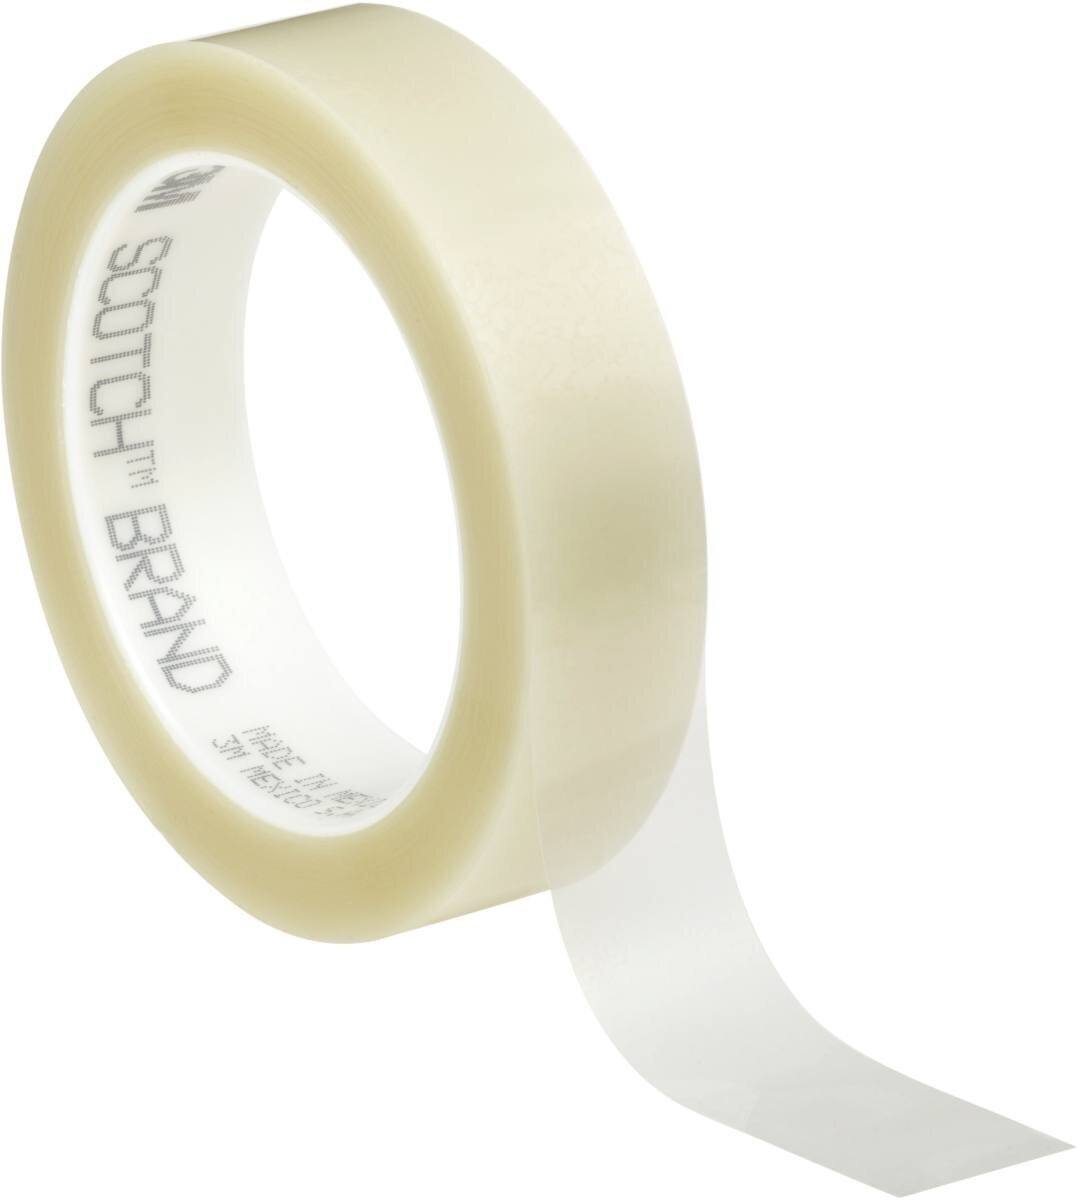 3M polyester adhesive tape 853, transparent, 50 mm x 66 m, 0.06 mm